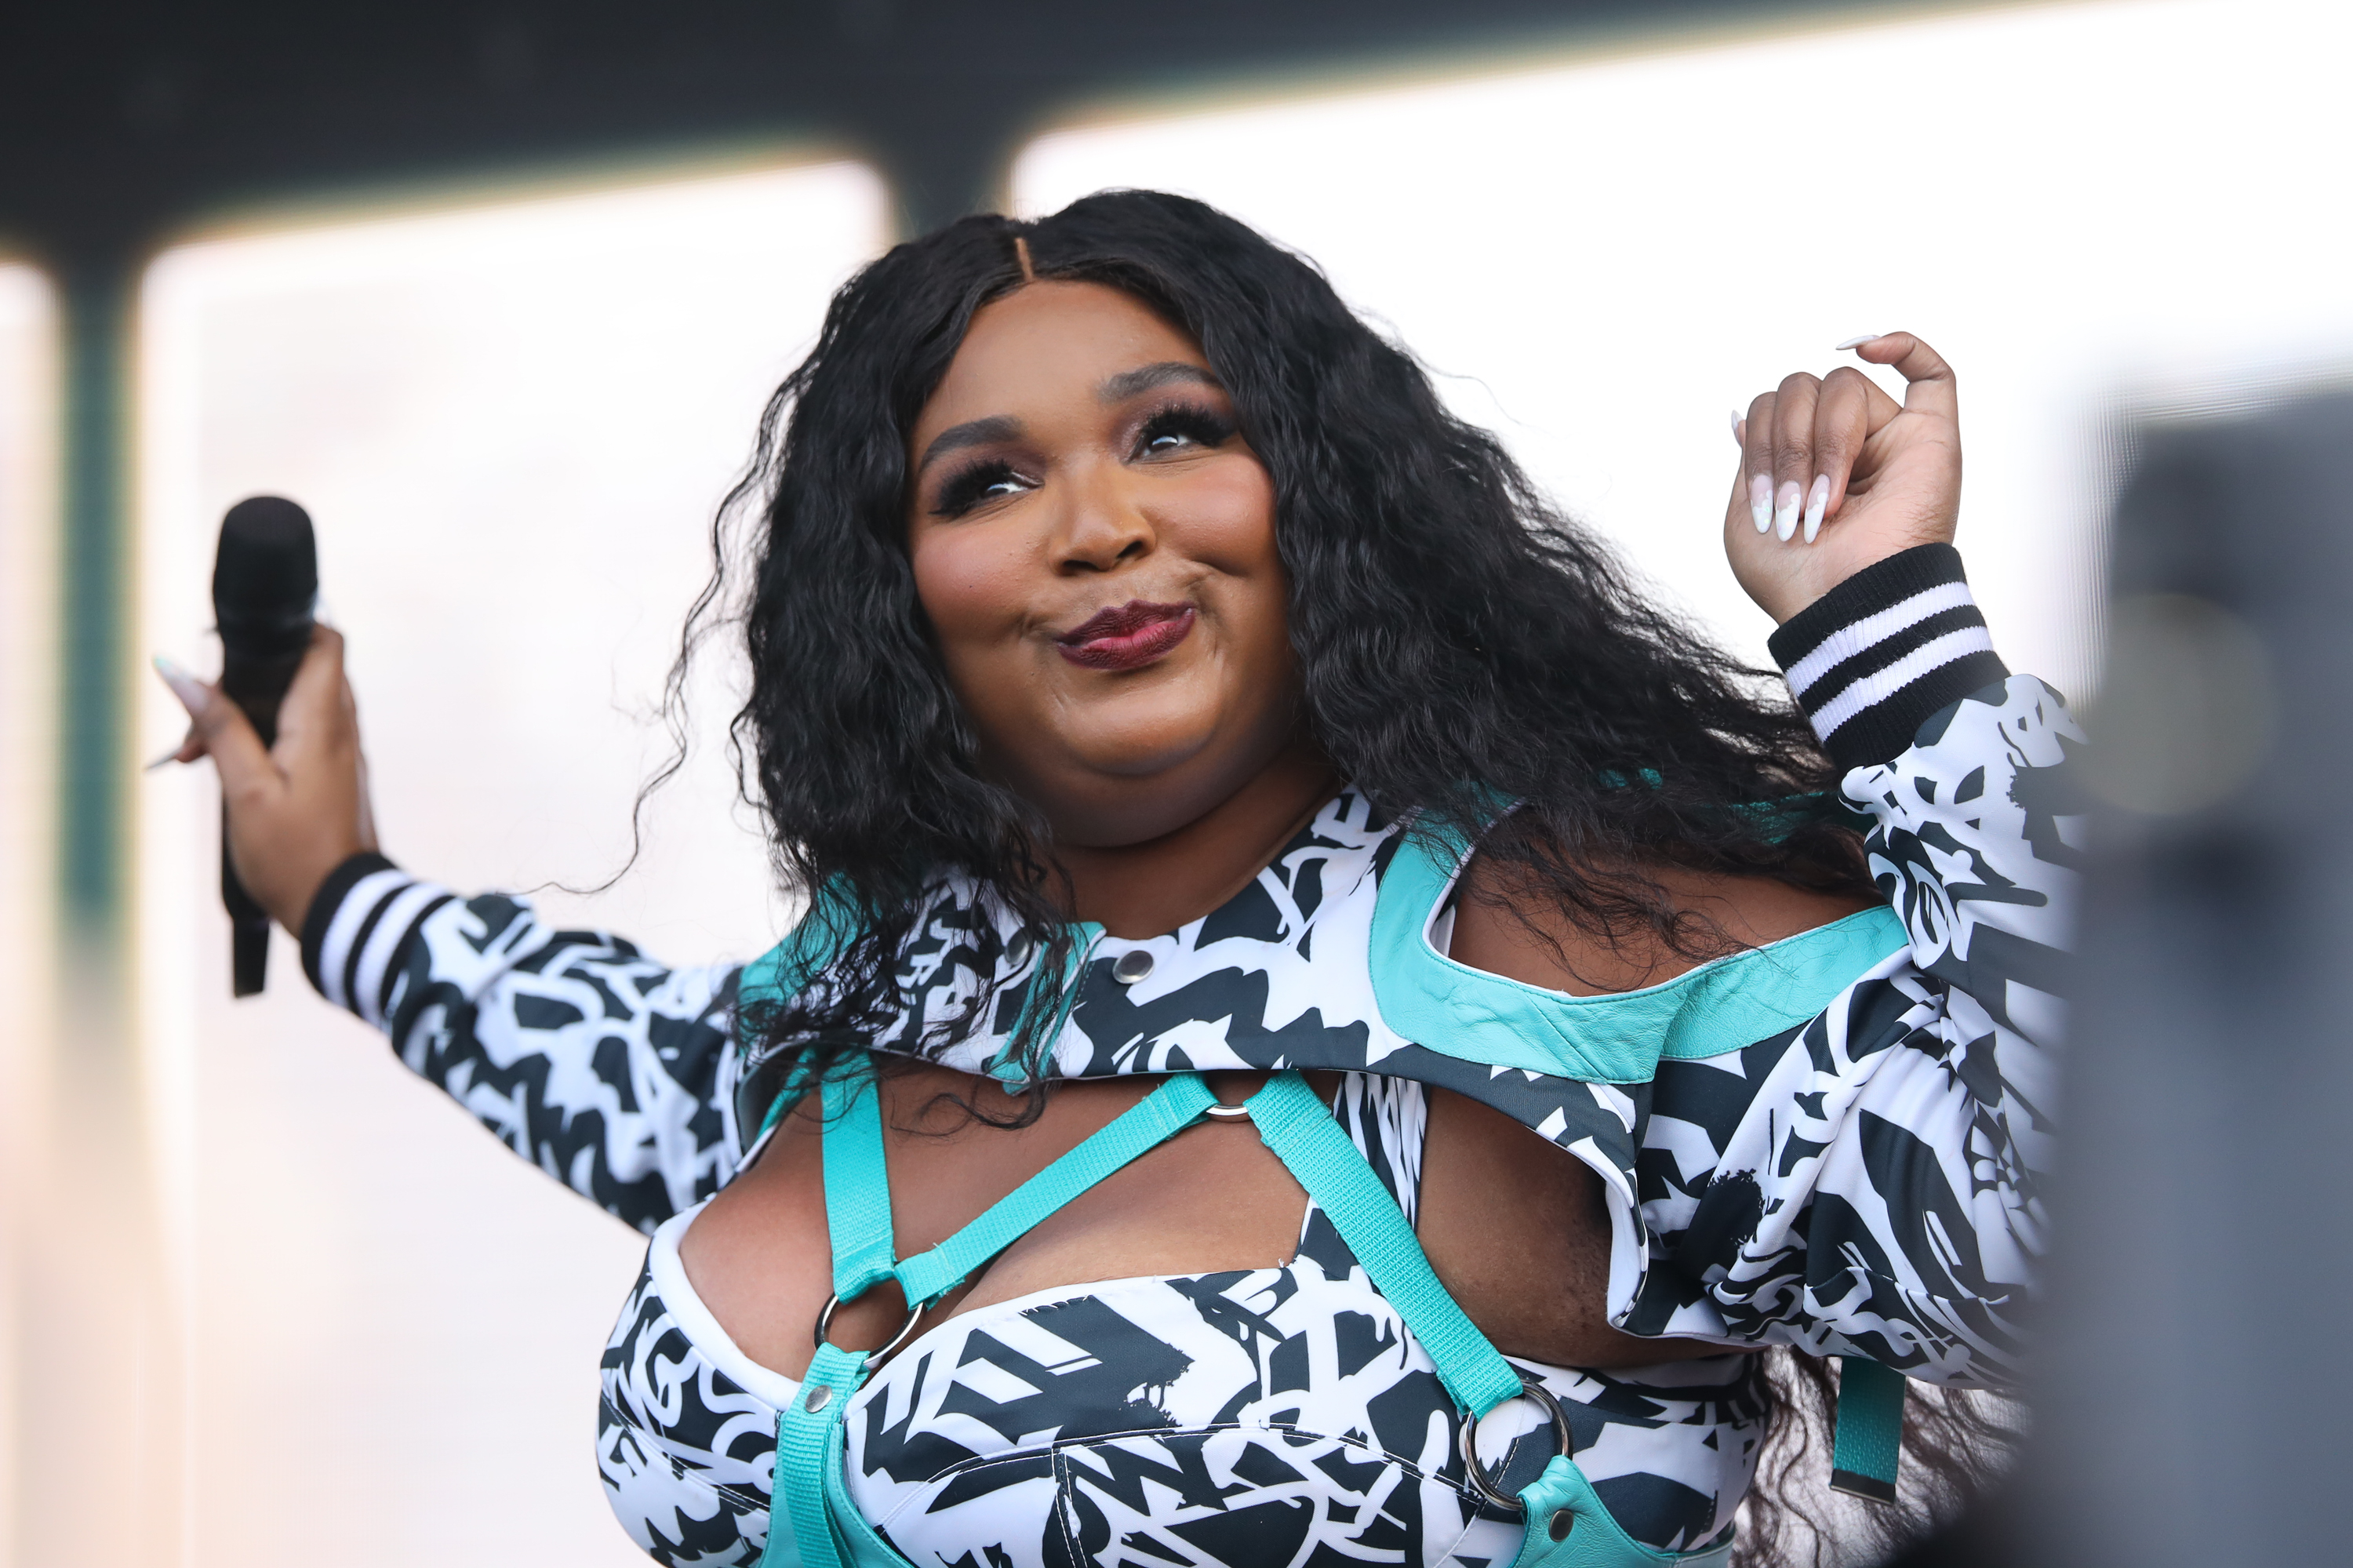 Lizzo performs at FOMO Festival 2020 on January 15, 2020 in Auckland, New Zealand. (WireImage—2020 Dave Simpson)